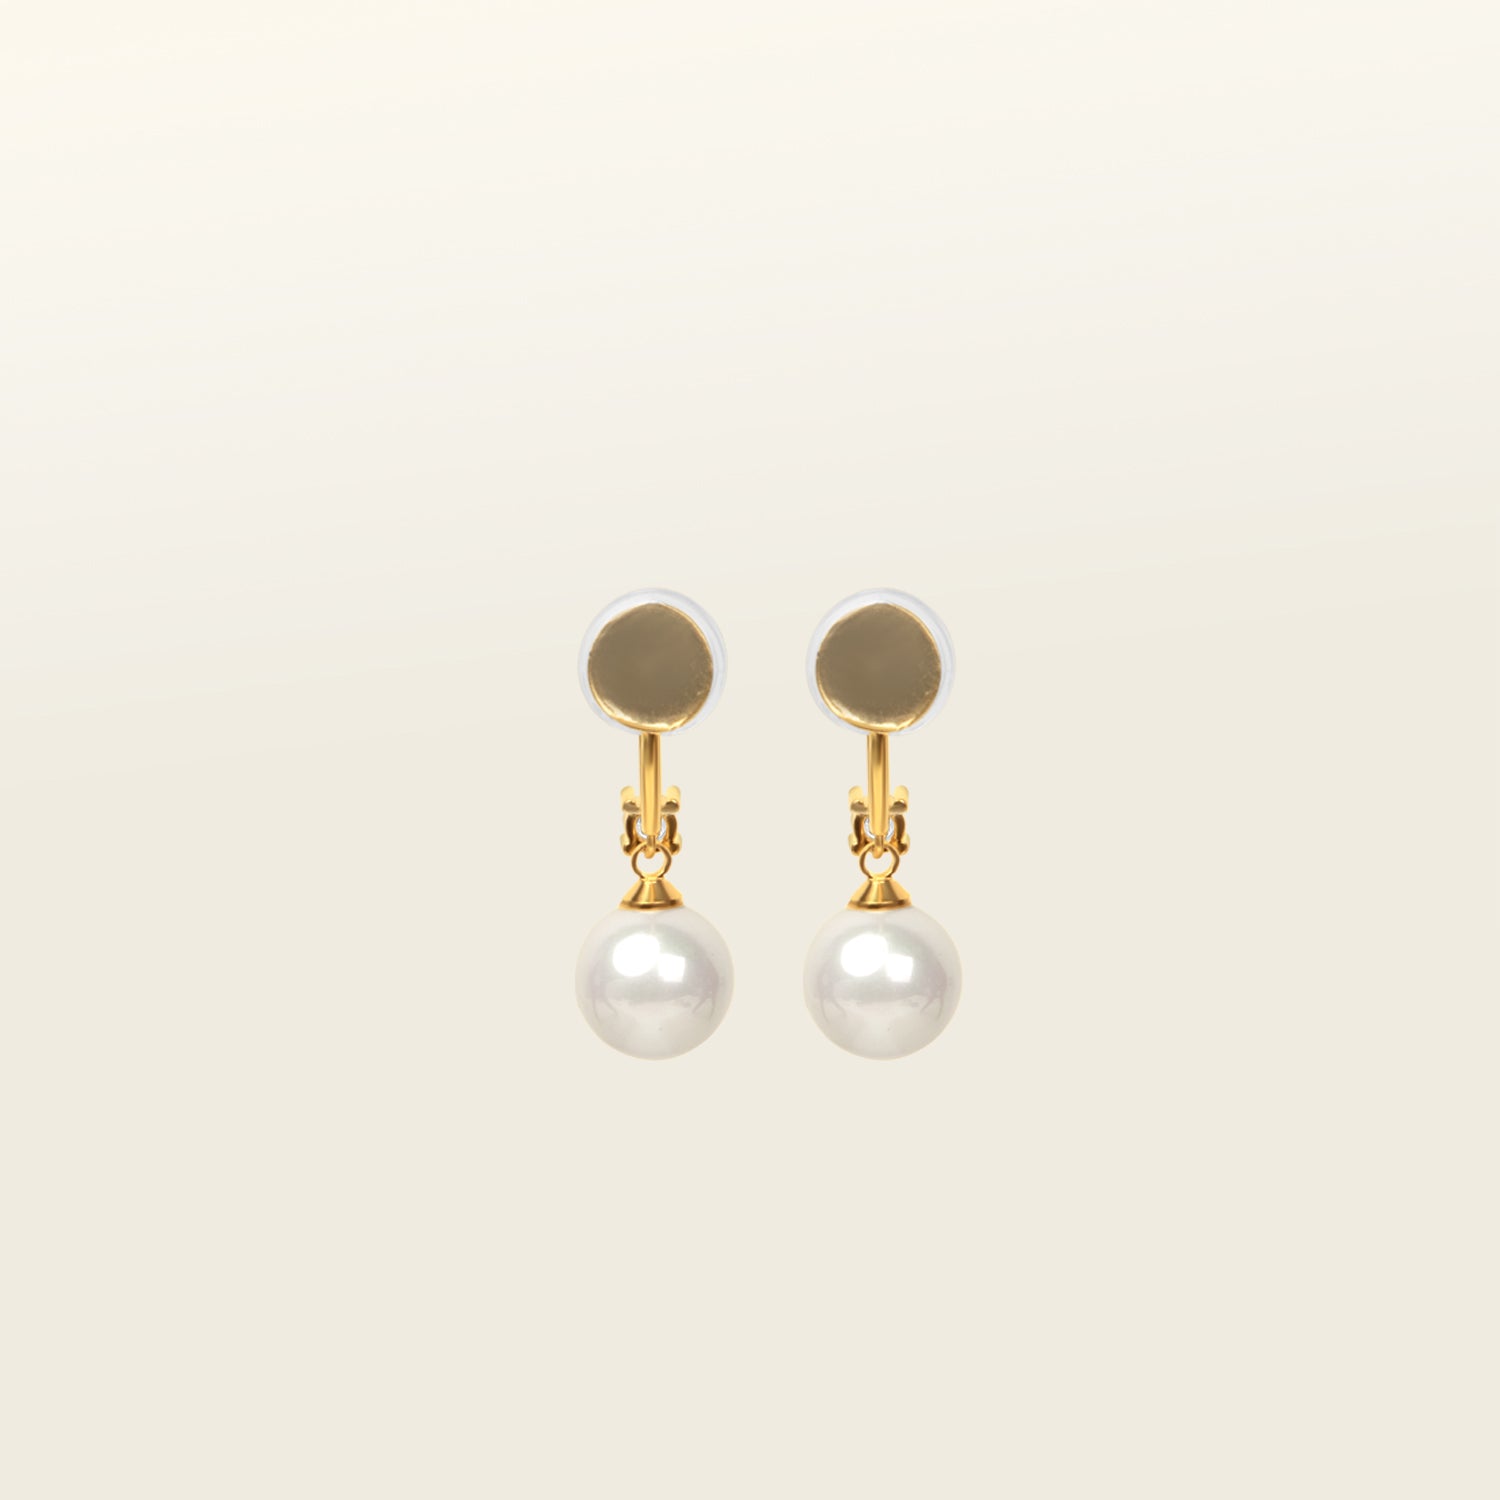 Image of the Claire Pearl Clip On Earrings in Gold bear Mosquito Coil Clip-Ons, offering a secure, comfortable fit for all types of ears - from Thick/Large to Sensitive, Small/Thin, and even Stretched/Healing - for up to 24 hours. Meticulously fashioned from 18K Gold plated metal alloy, Cubic Zirconia, and Simulated Faux Pearl, this chic design is Non-Tarnish and Water Resistant.